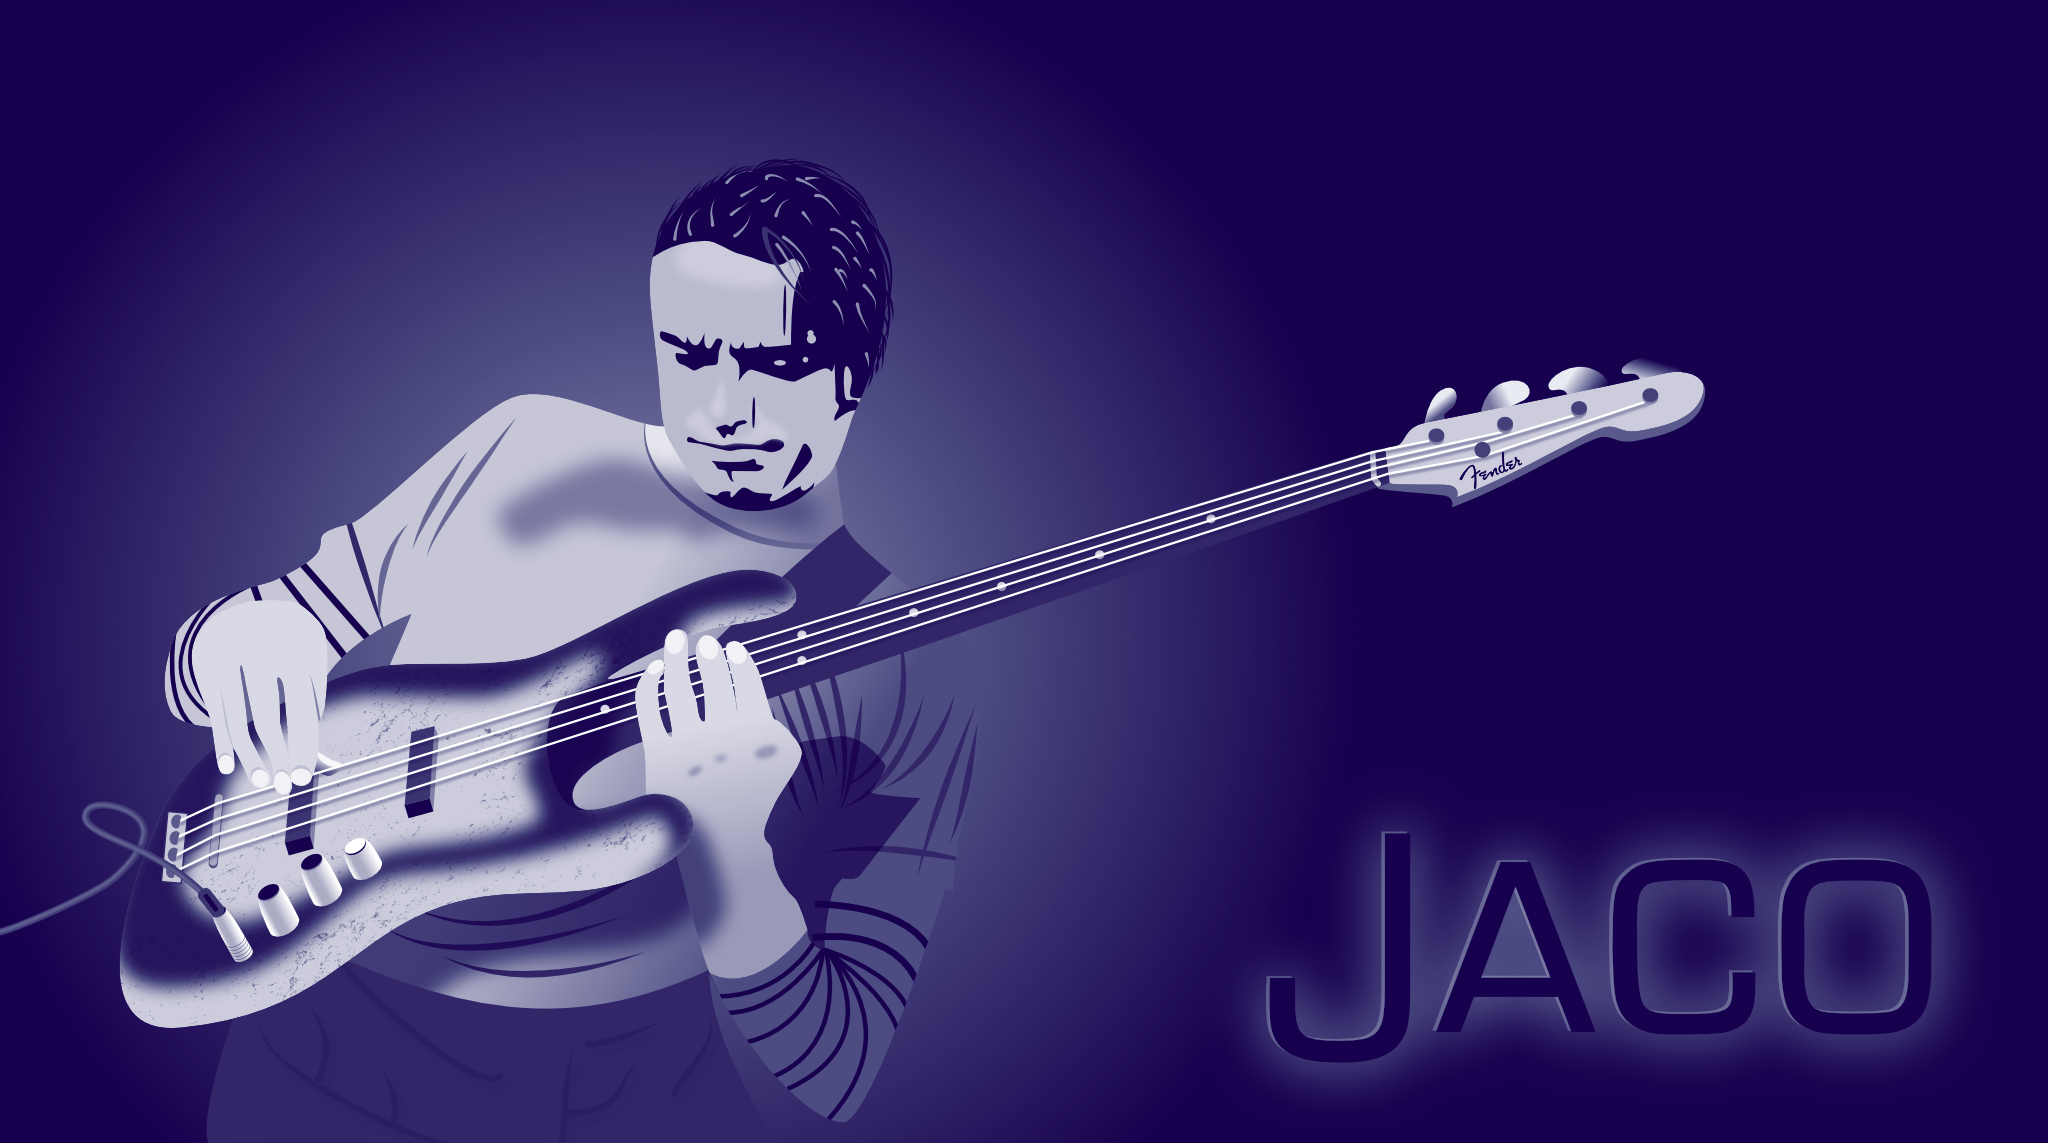 Illustration of Jaco Pastorius, jazz legend and bass player